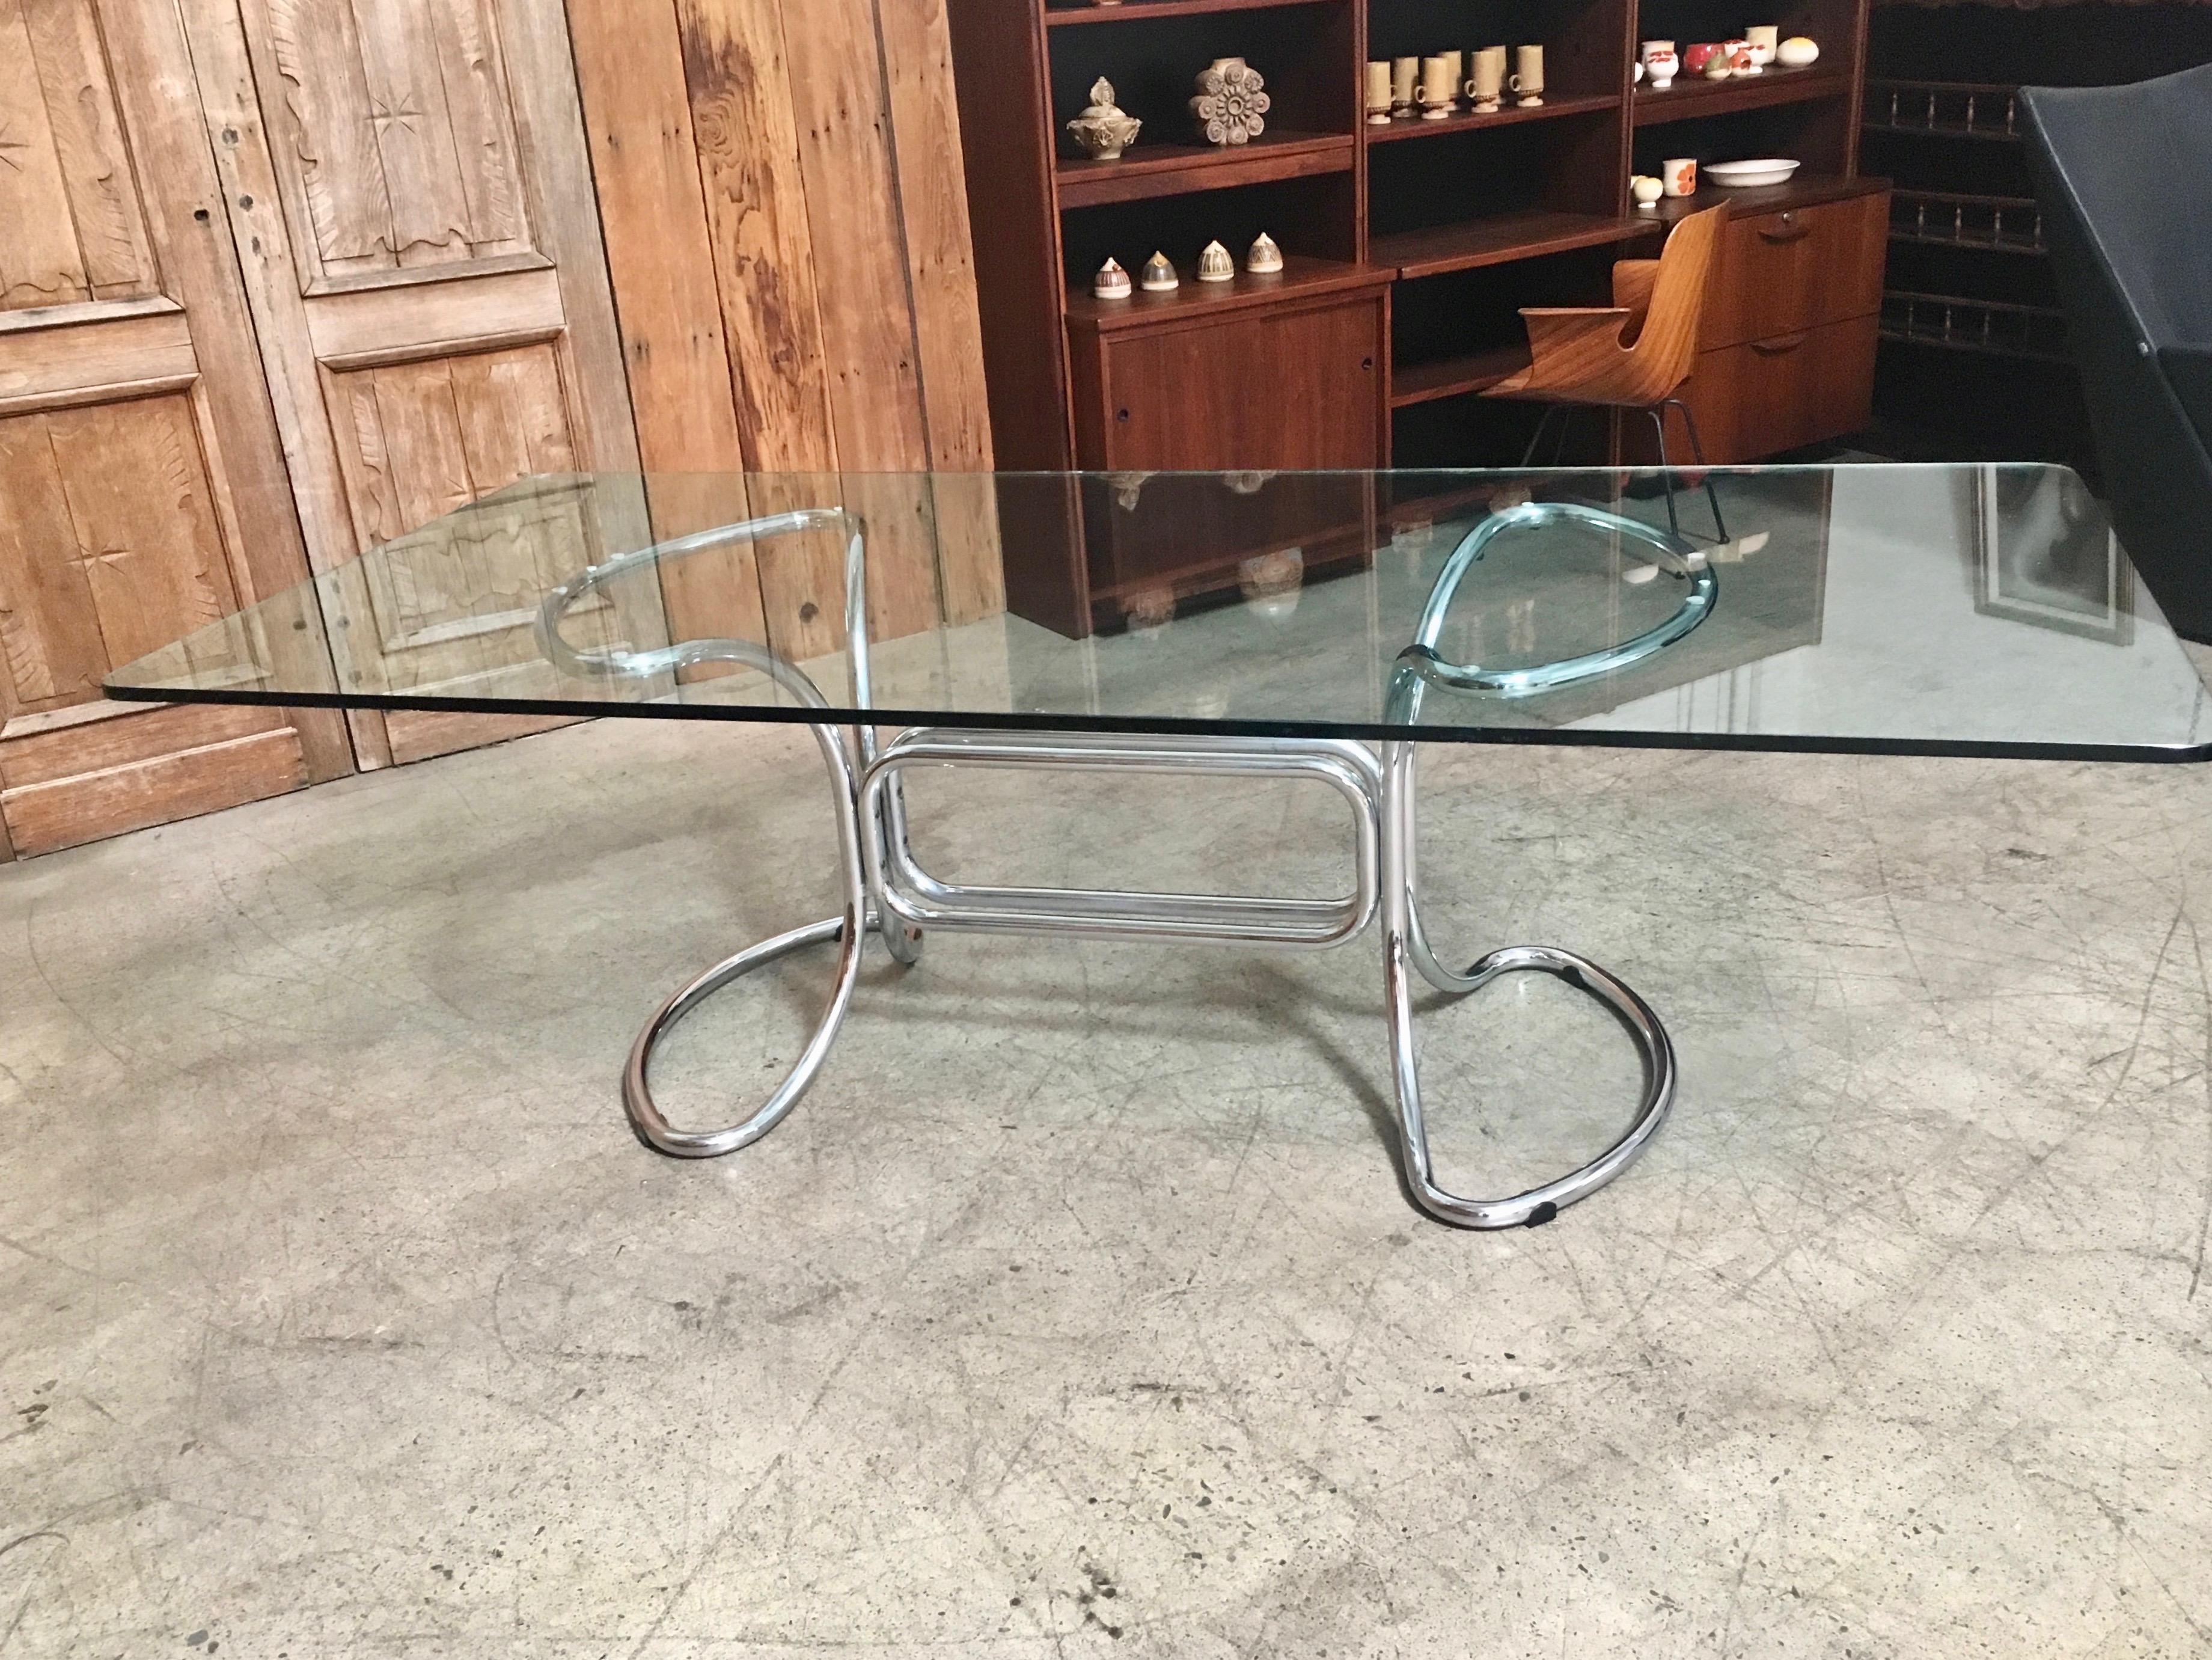 Italian glass & steel tube dining table by Giotto Stoppino, Italy 1970s. Table base measures 59.5 long by 28